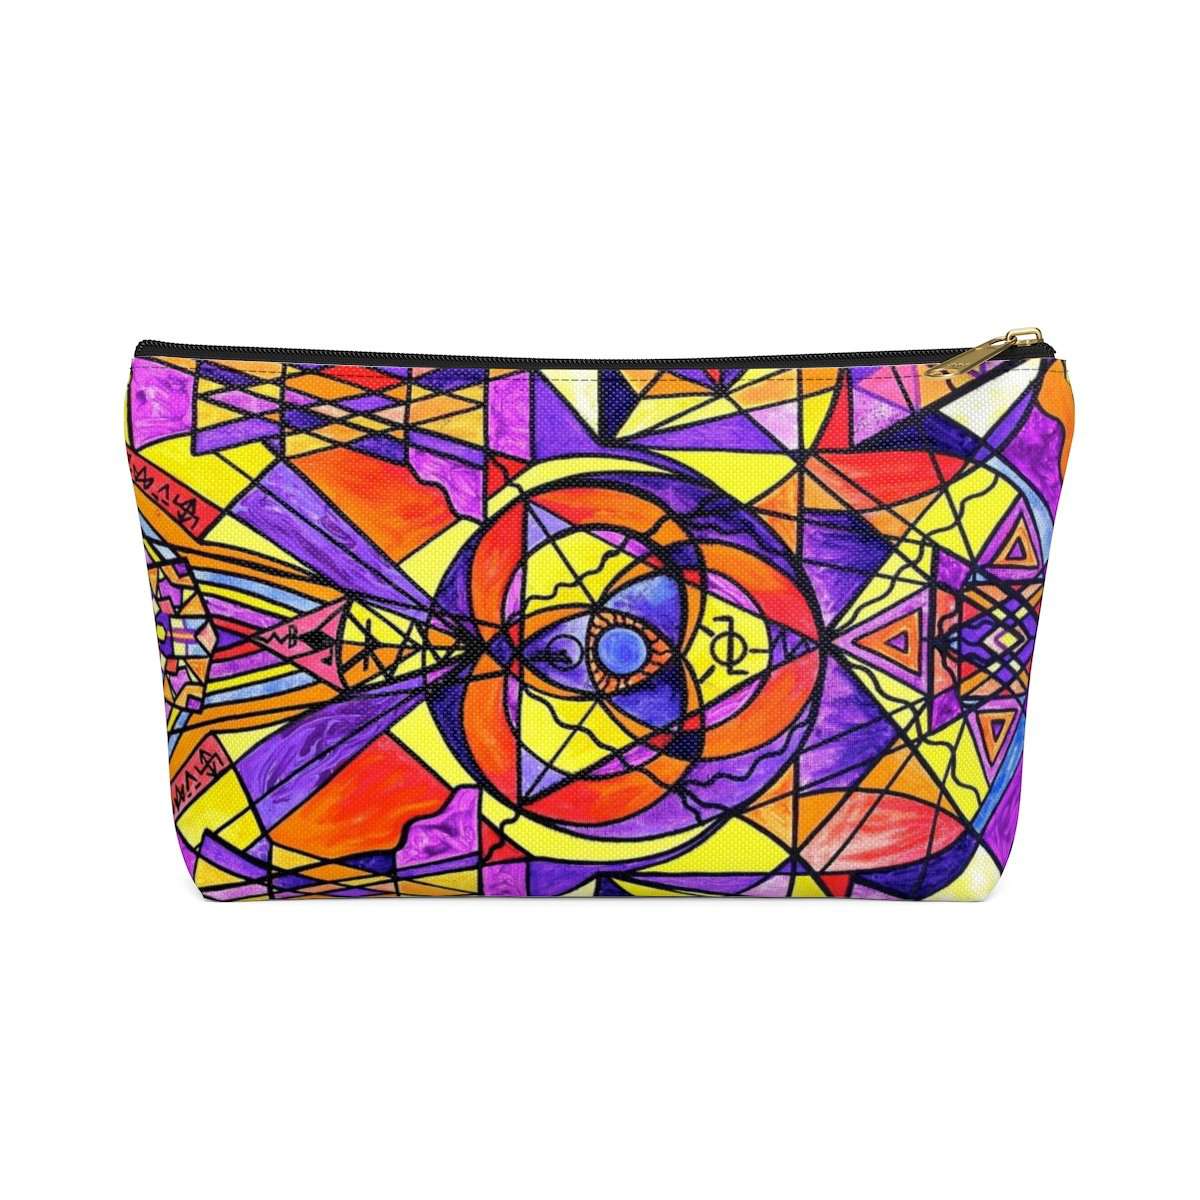 get-your-dream-of-the-destiny-grid-accessory-pouch-w-t-bottom-on-sale_11.jpg